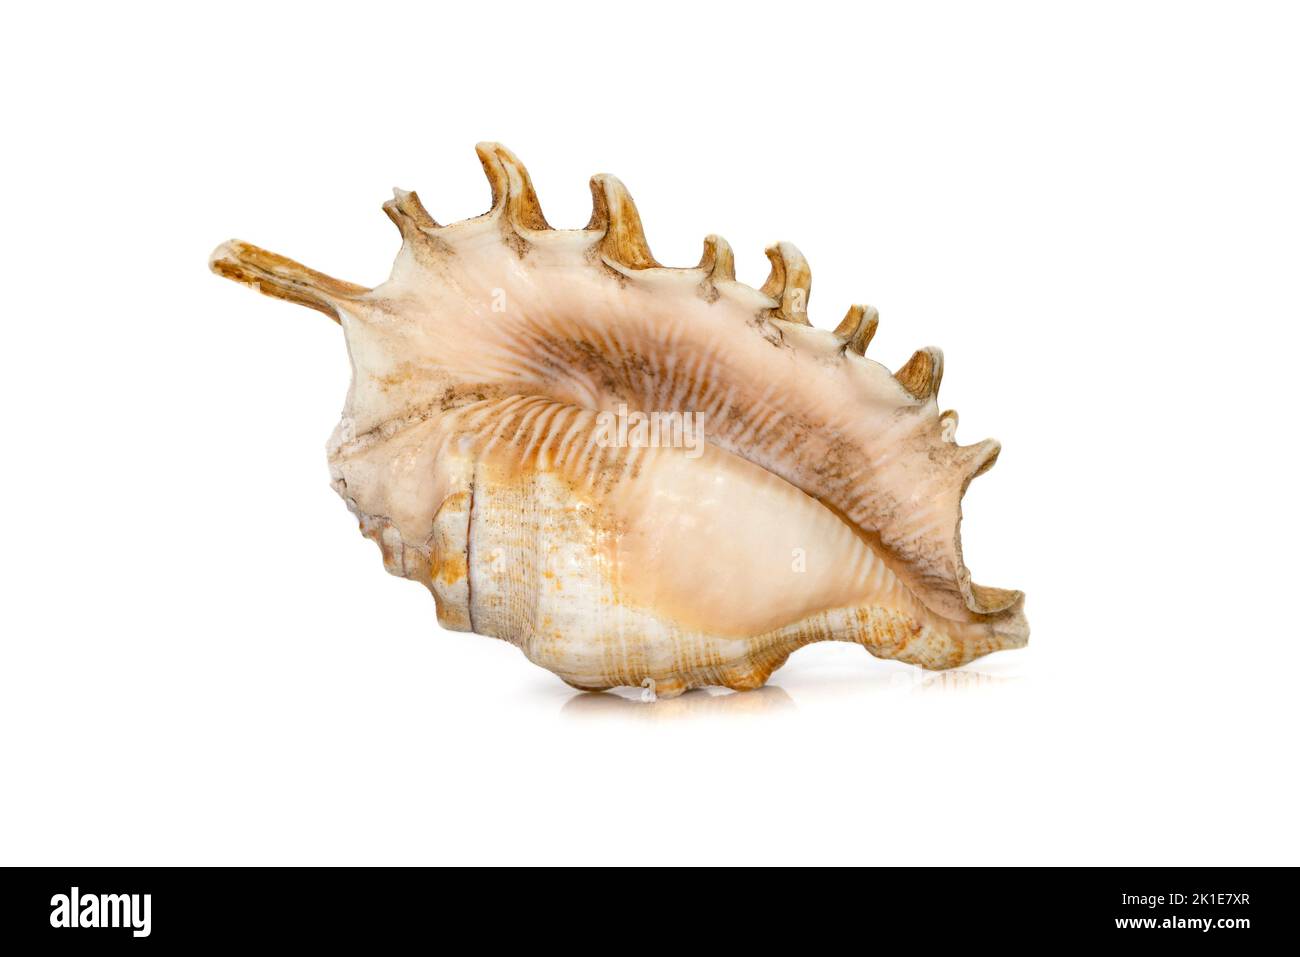 Image of Millipede spider conch (Lambis millepeda) isolated on white background. Sea snail. Undersea Animals. Sea Shells. Stock Photo